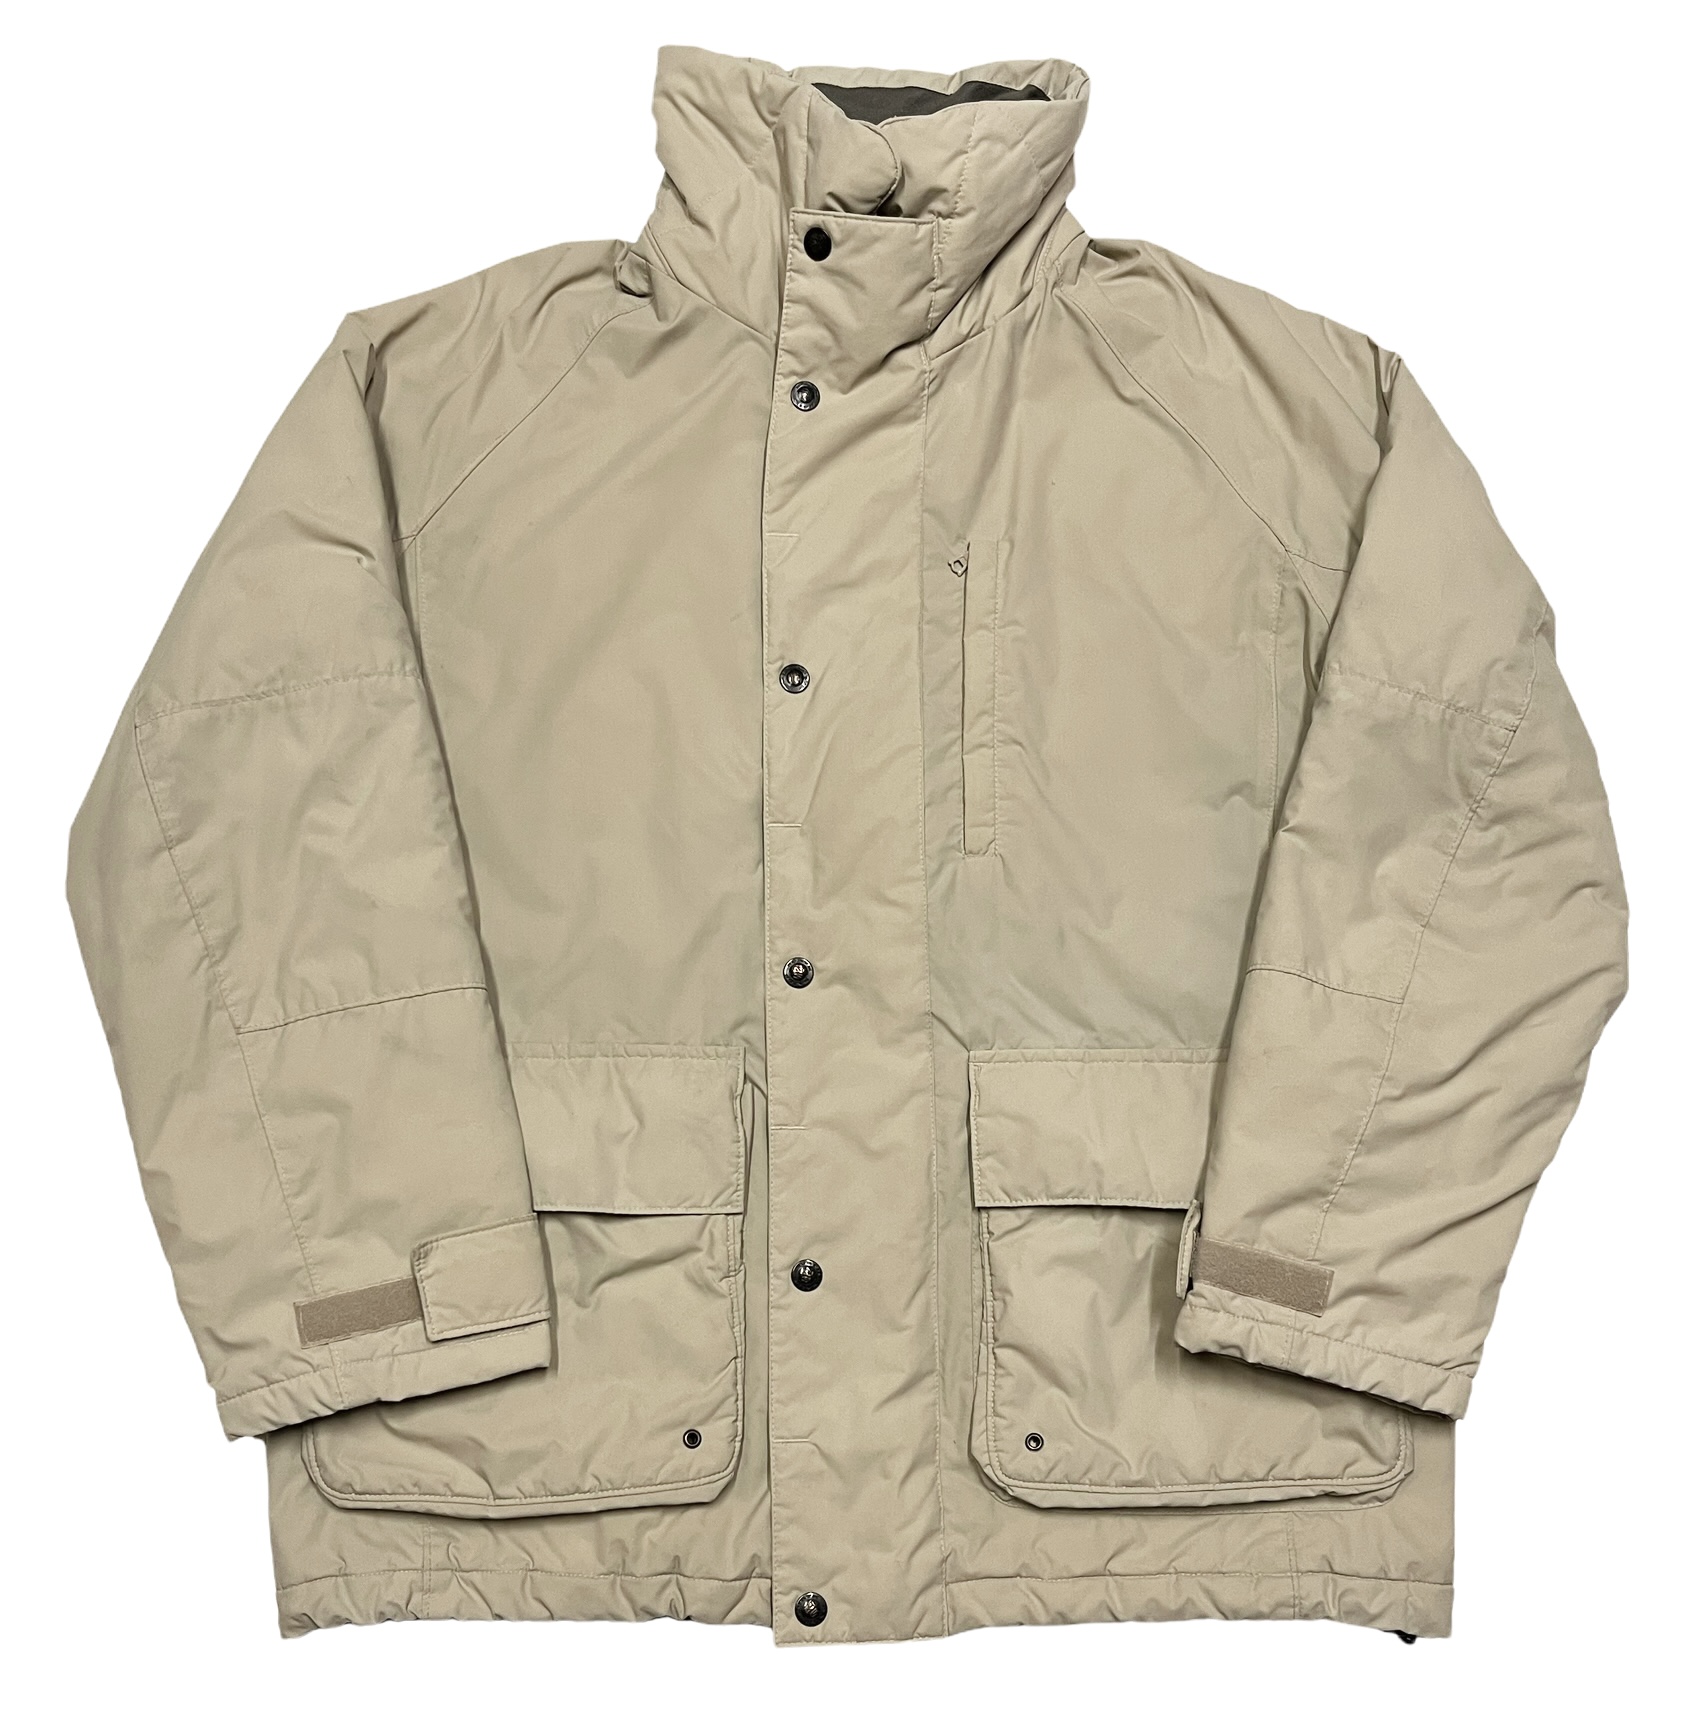 North Sails winter jacket - Lowkey Archives